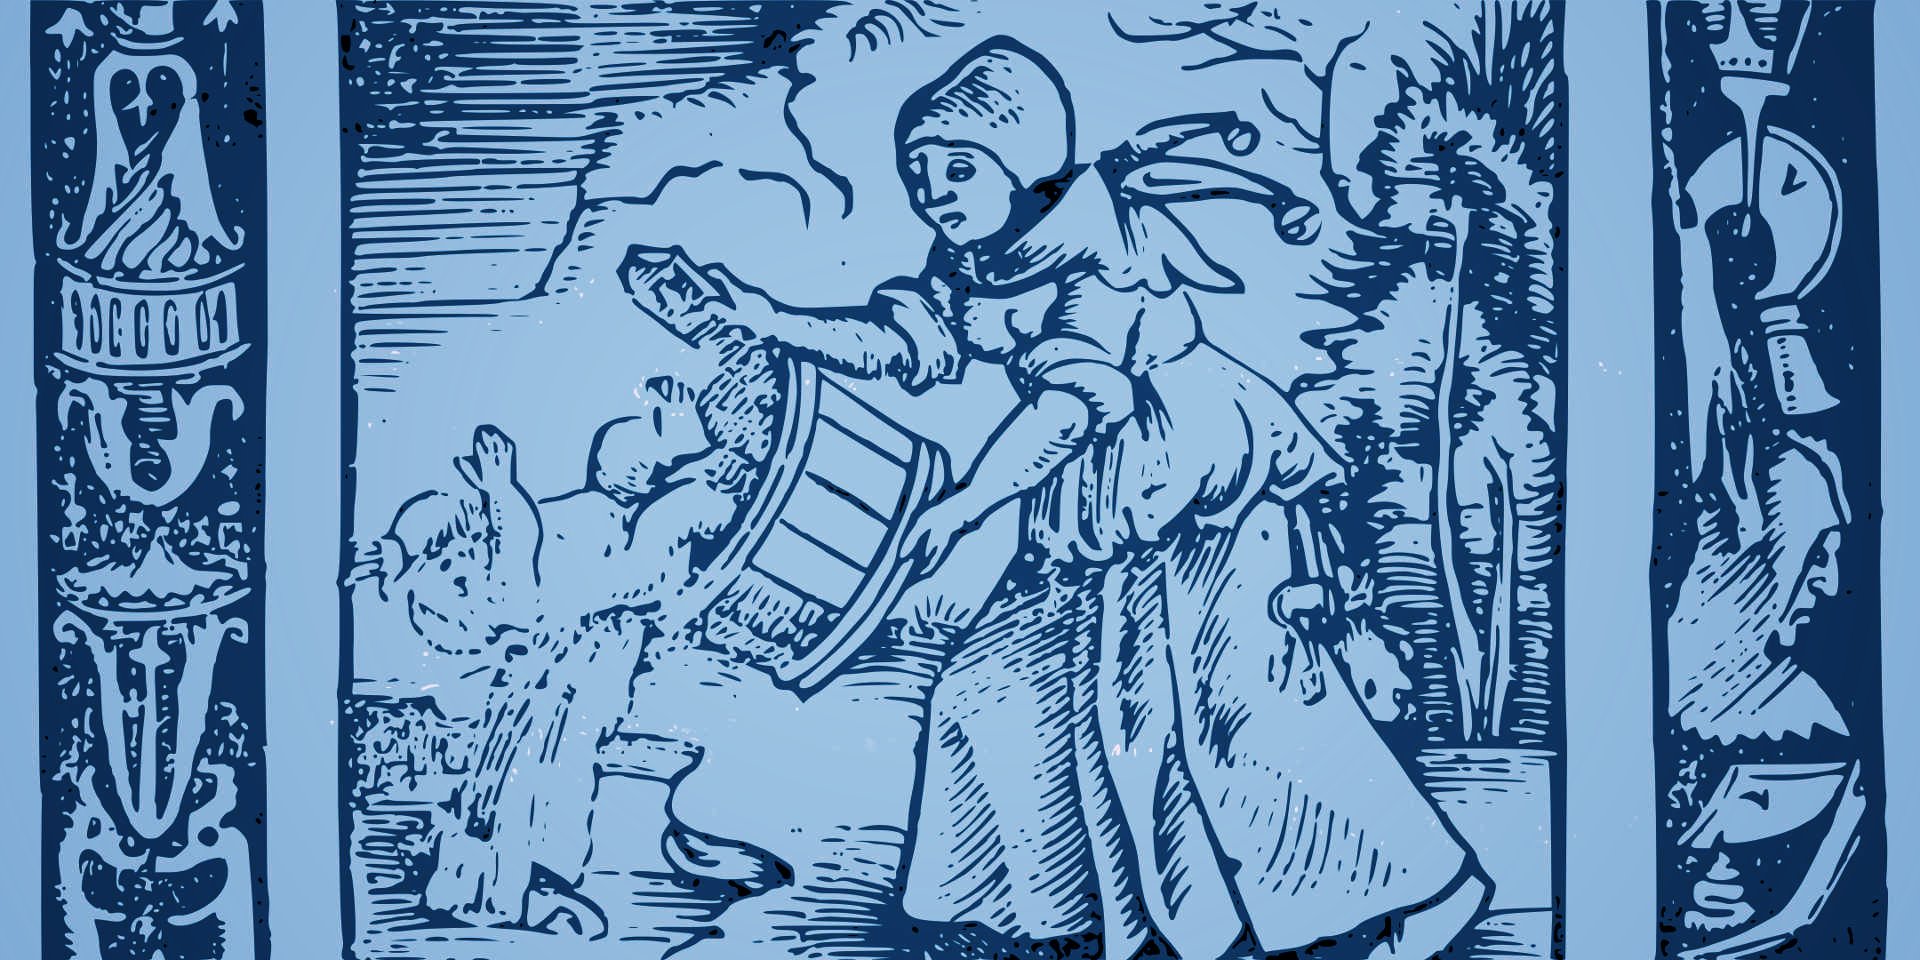 A wood carving, colourised with a blue tint, of a woman throwing the baby out with the bathwater